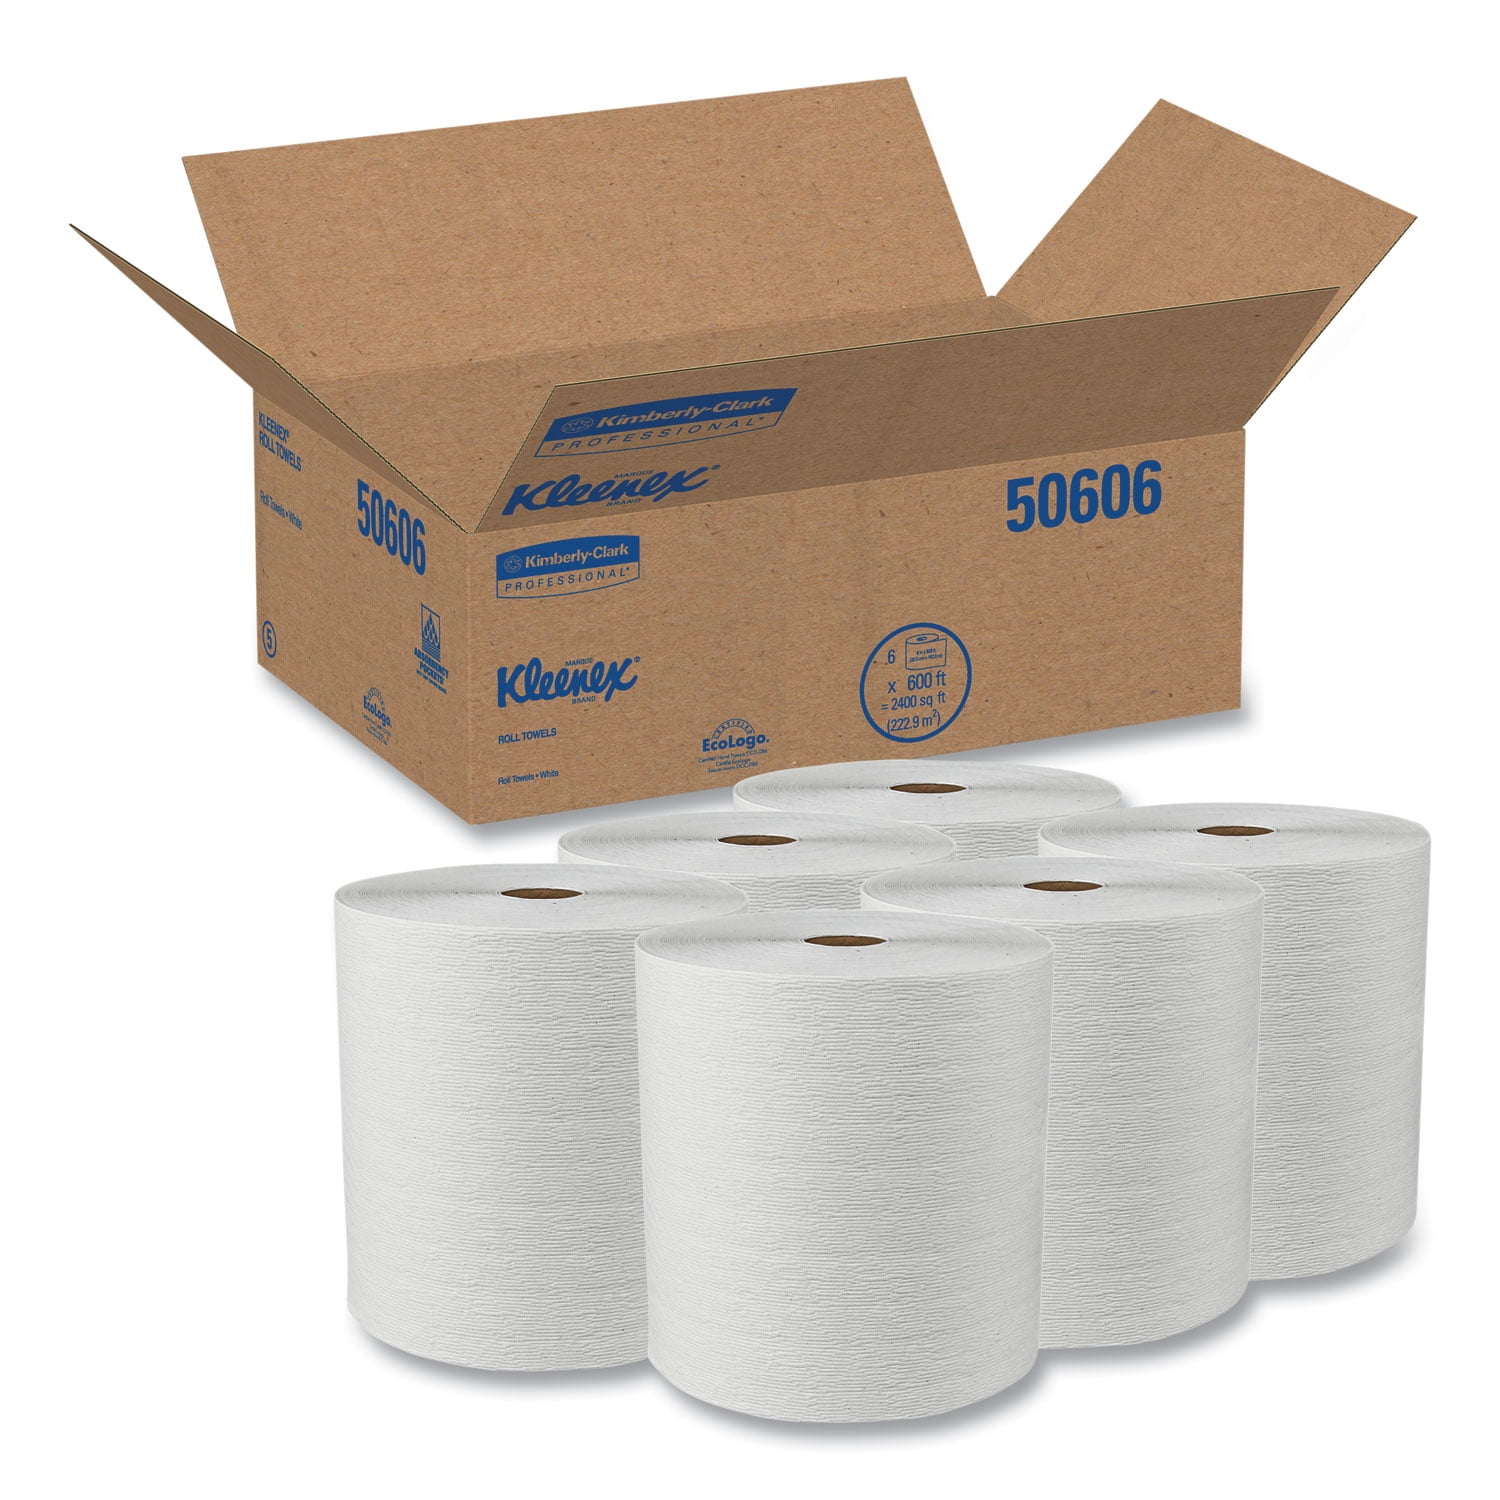 1,000 / Roll Scott High Capacity Hard Roll Paper Towels White 6,000 / Case 000' / Roll 000' / Case Kimberly-Clark Professional KIM10191 for Small Business 10191 6 Paper Towel Rolls / Convenience Case 